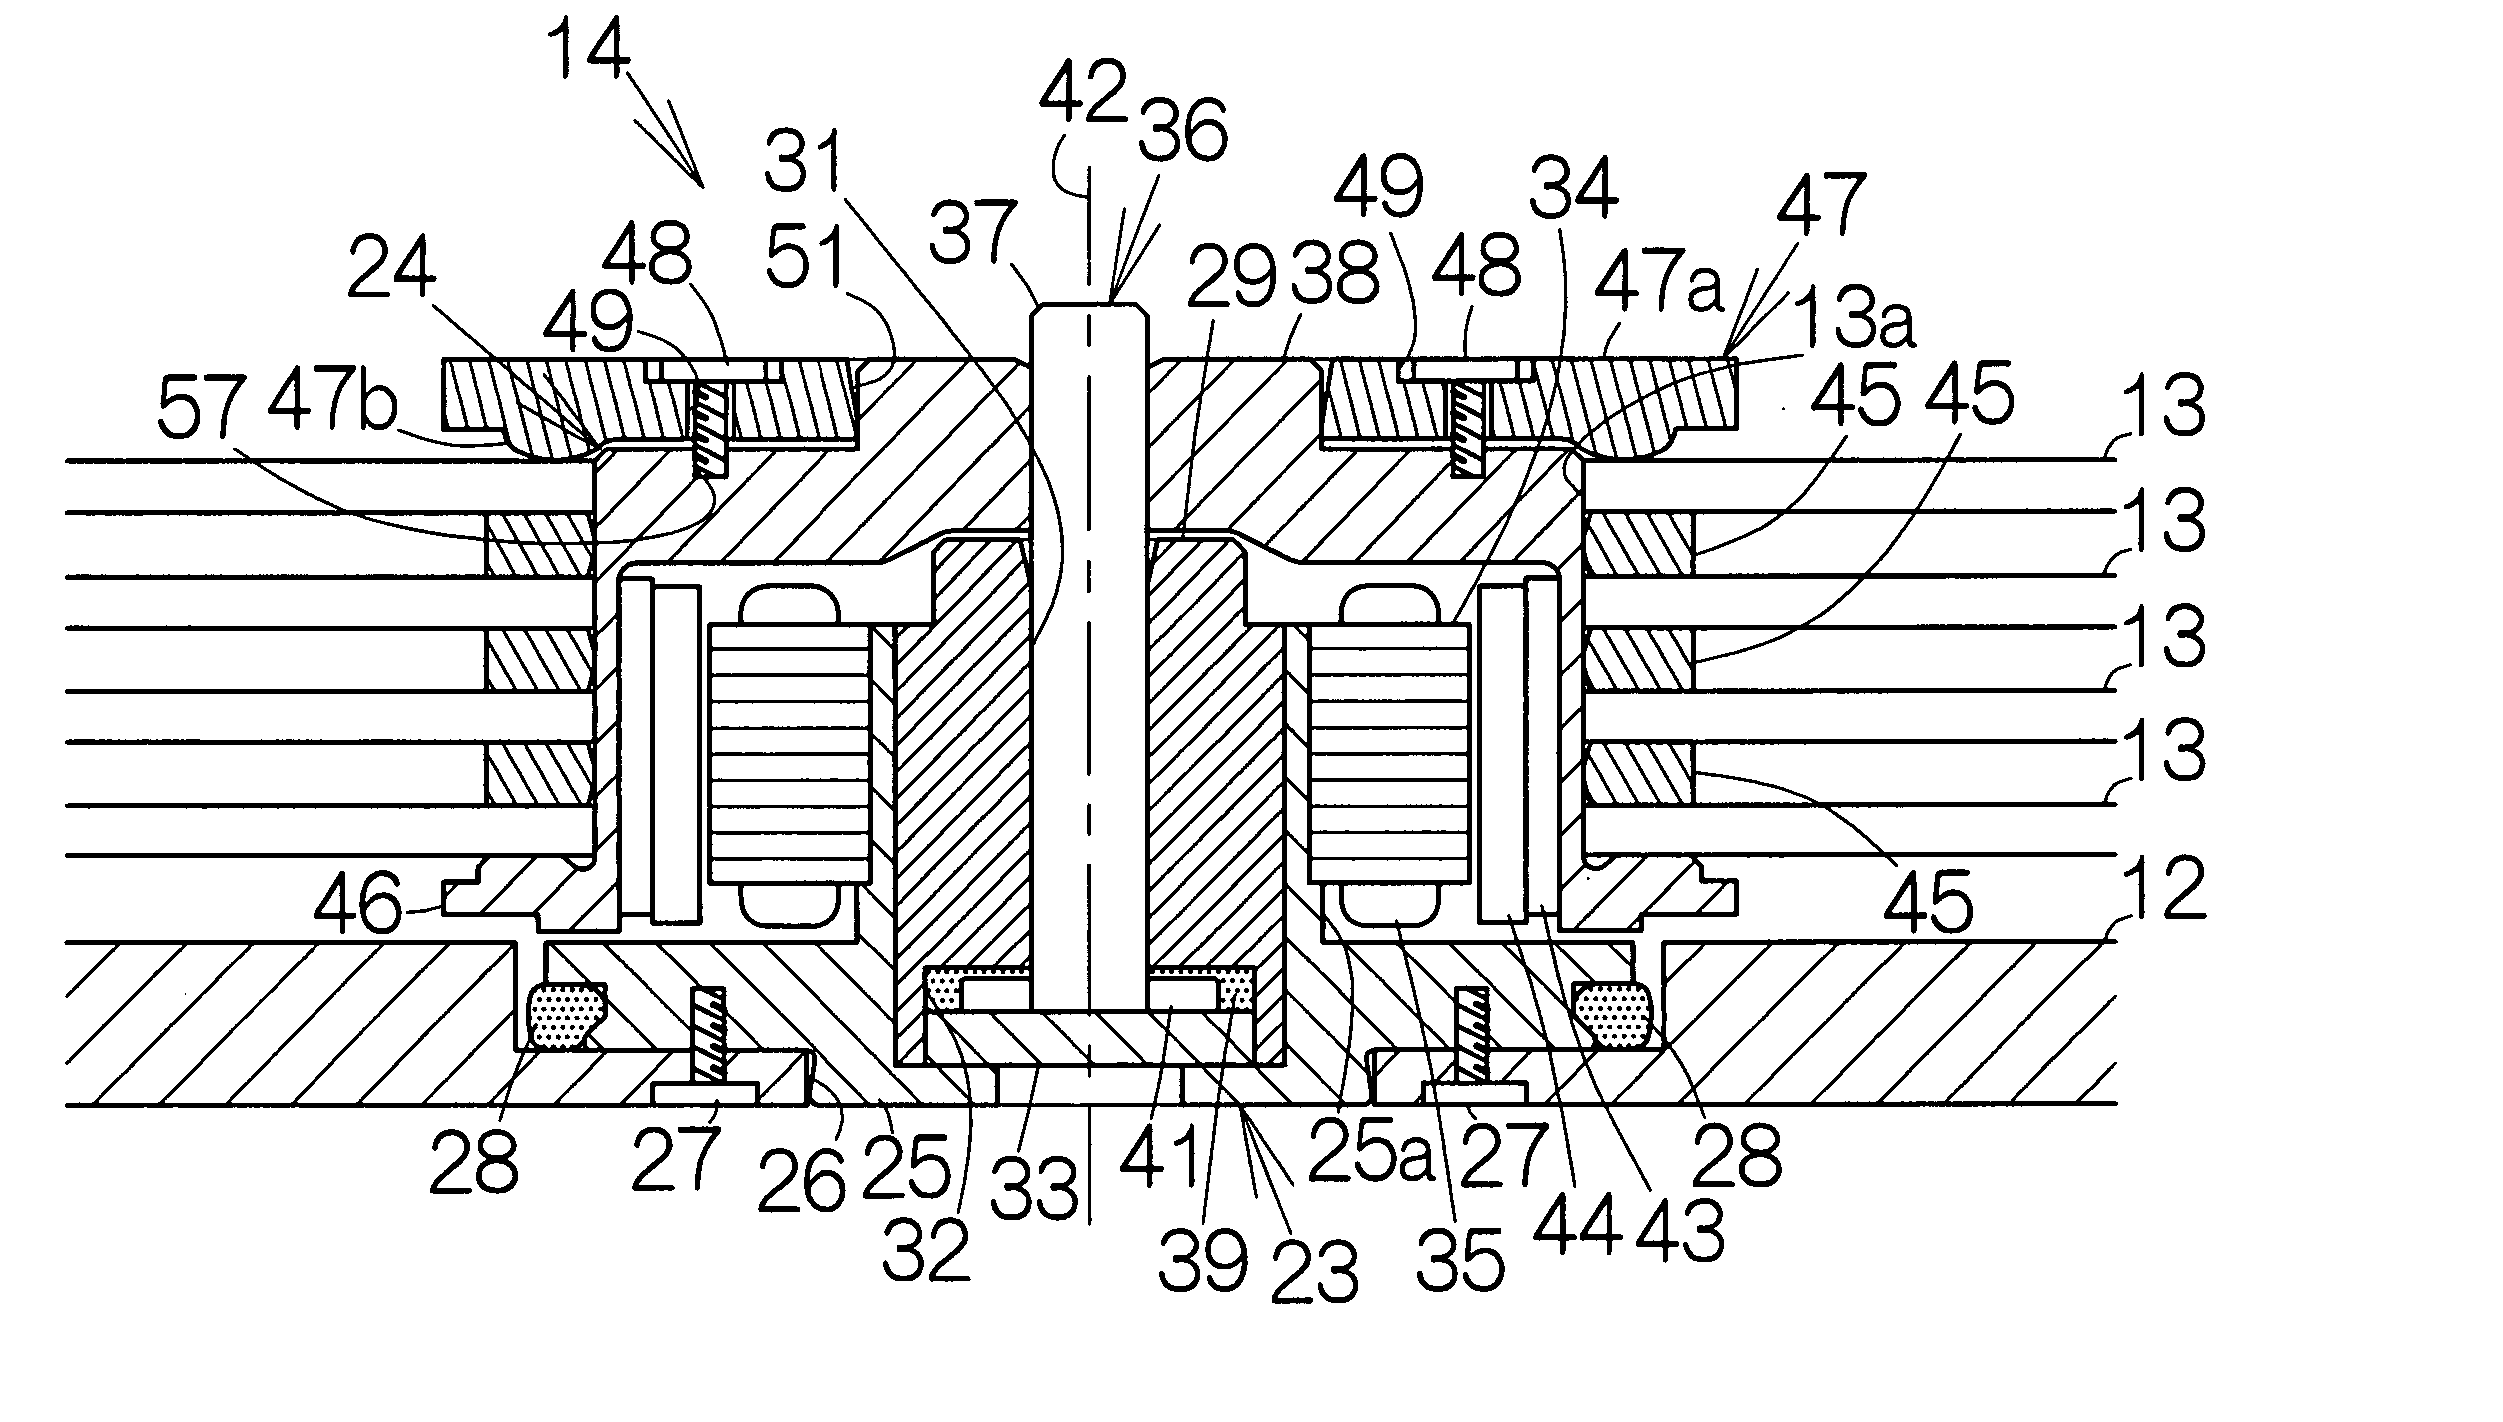 Recording disk drive capable of reducing vibration within enclosure